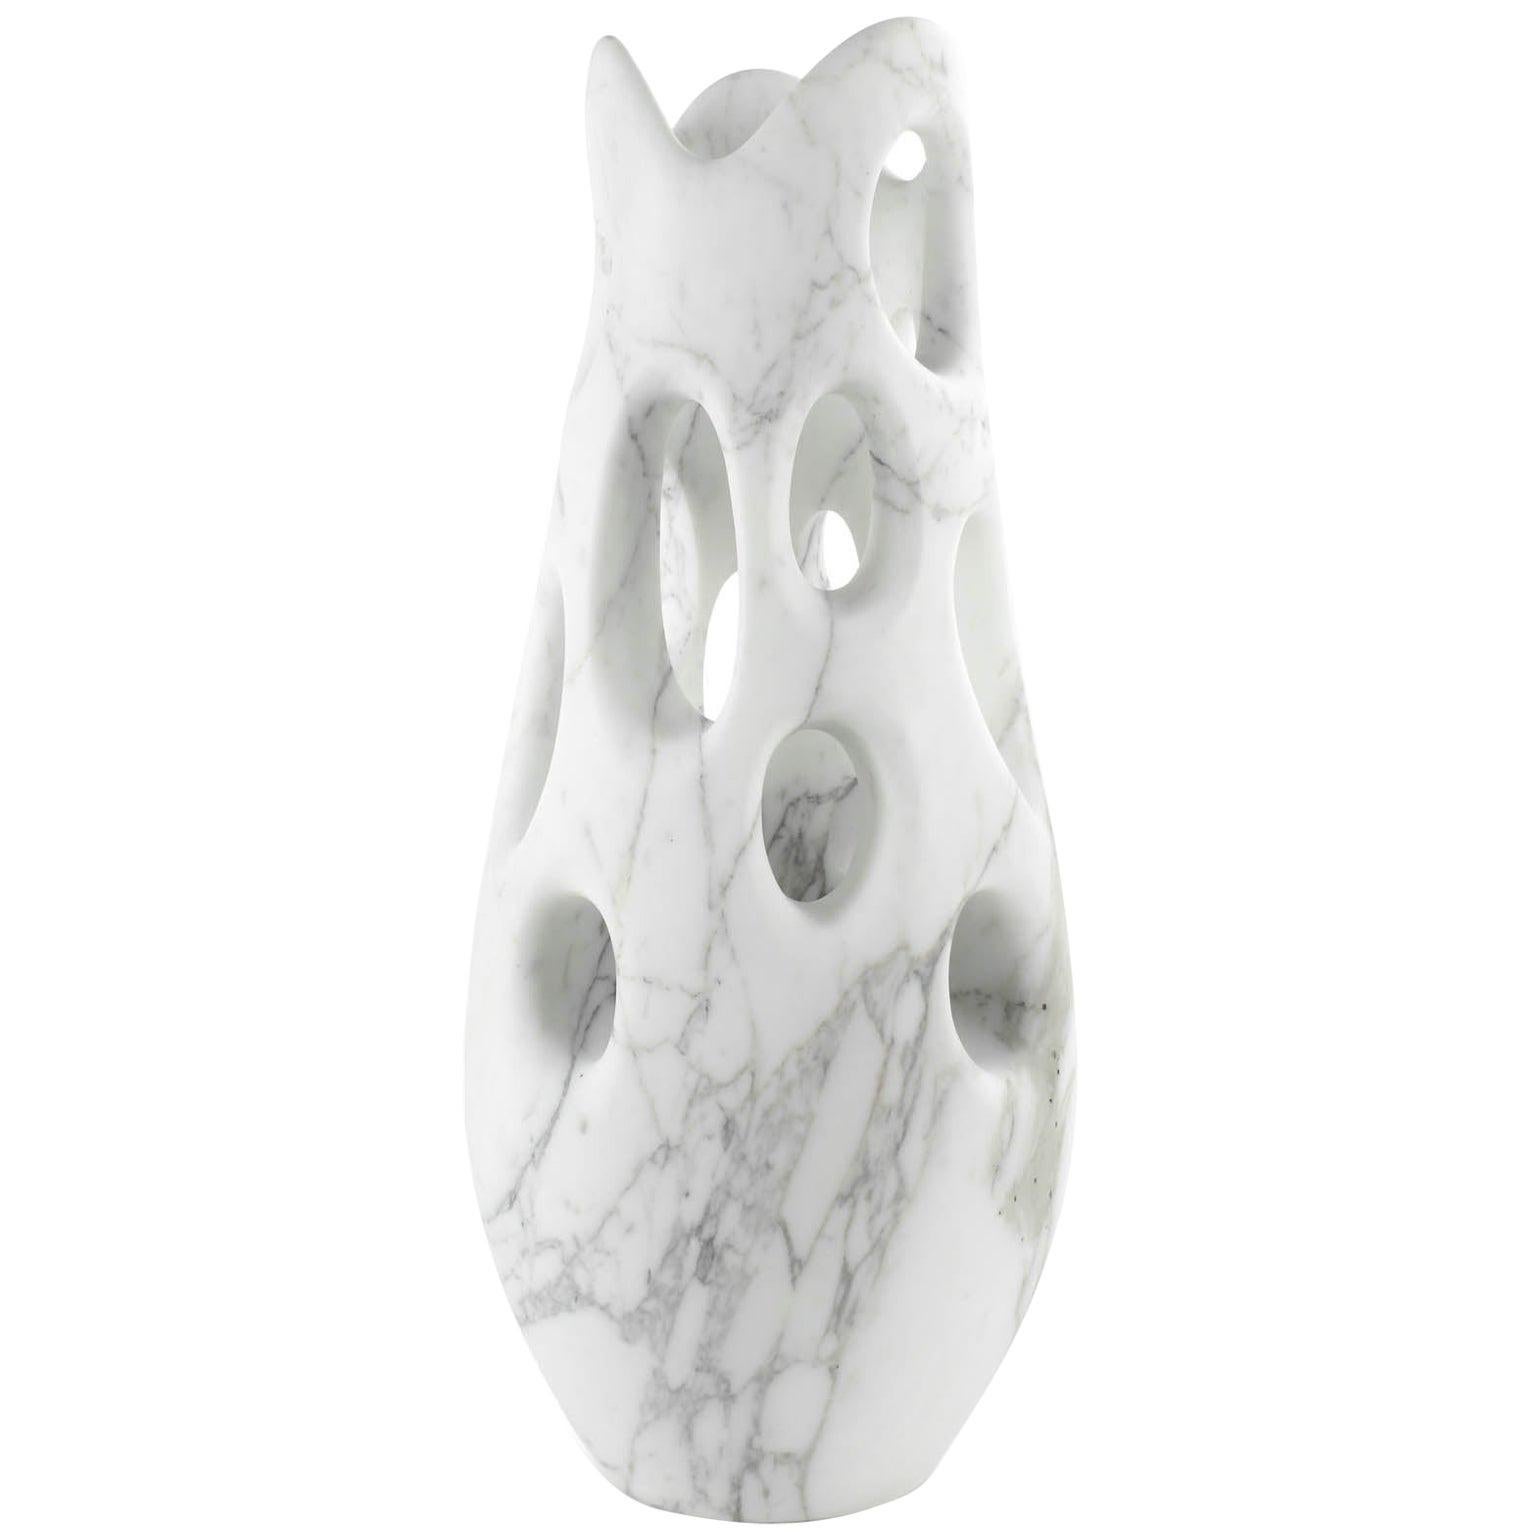 Vase Vessel Decorative Abstract Sculpture Organic Shape White Marble Hand-carved